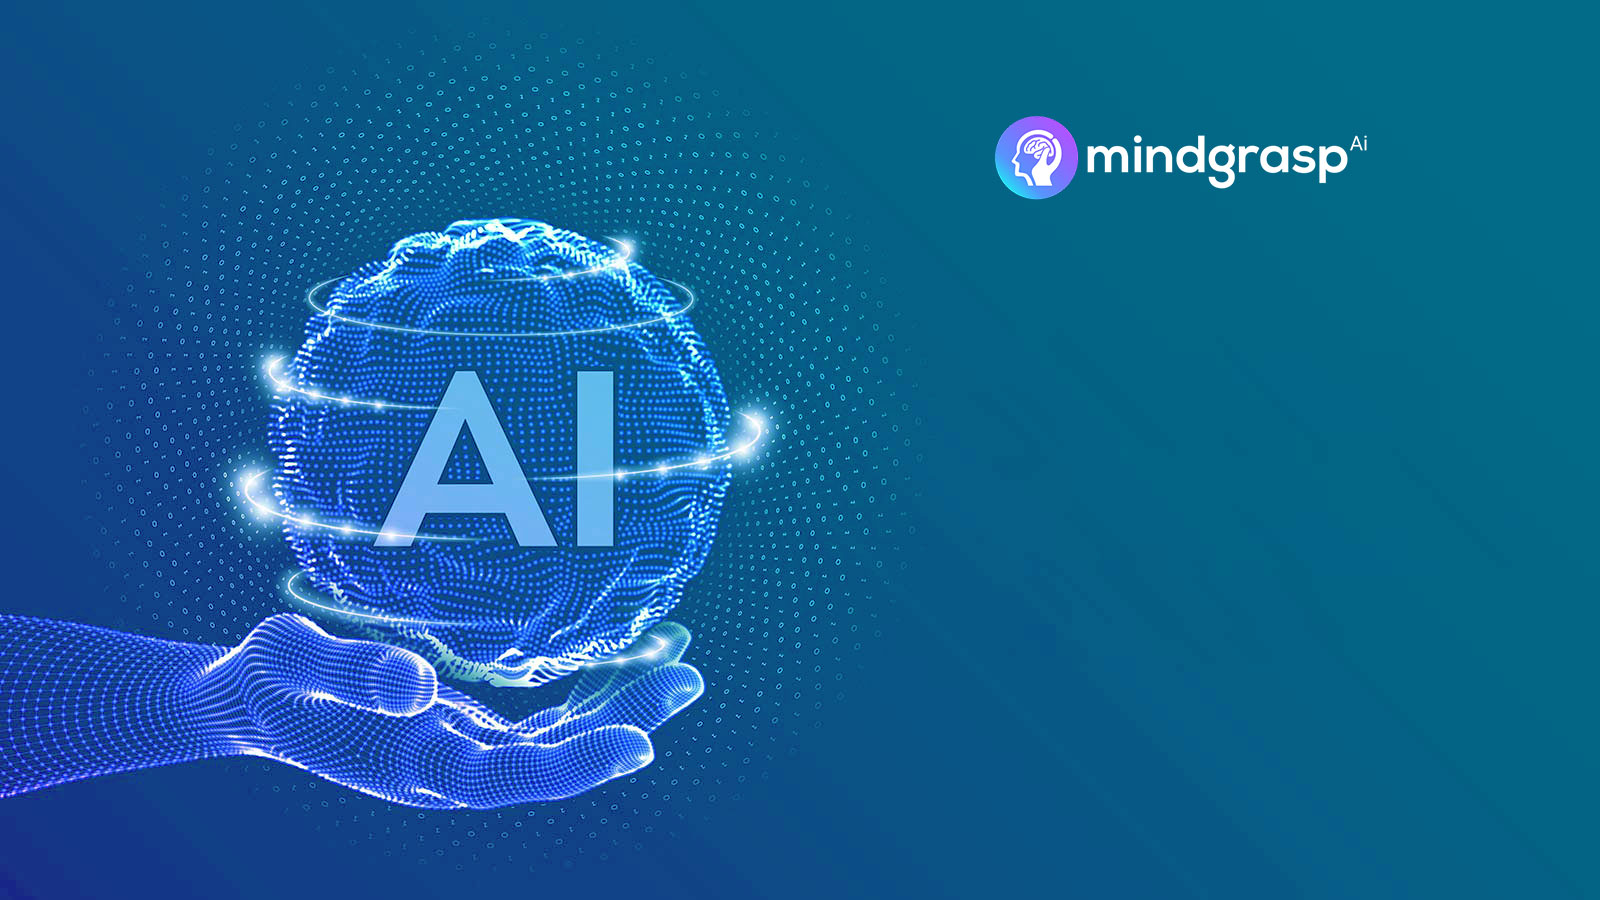 Edtech Startup Mindgrasp AI Expands, Adds Five Full-Time Positions due to Surging Demand – AiThority